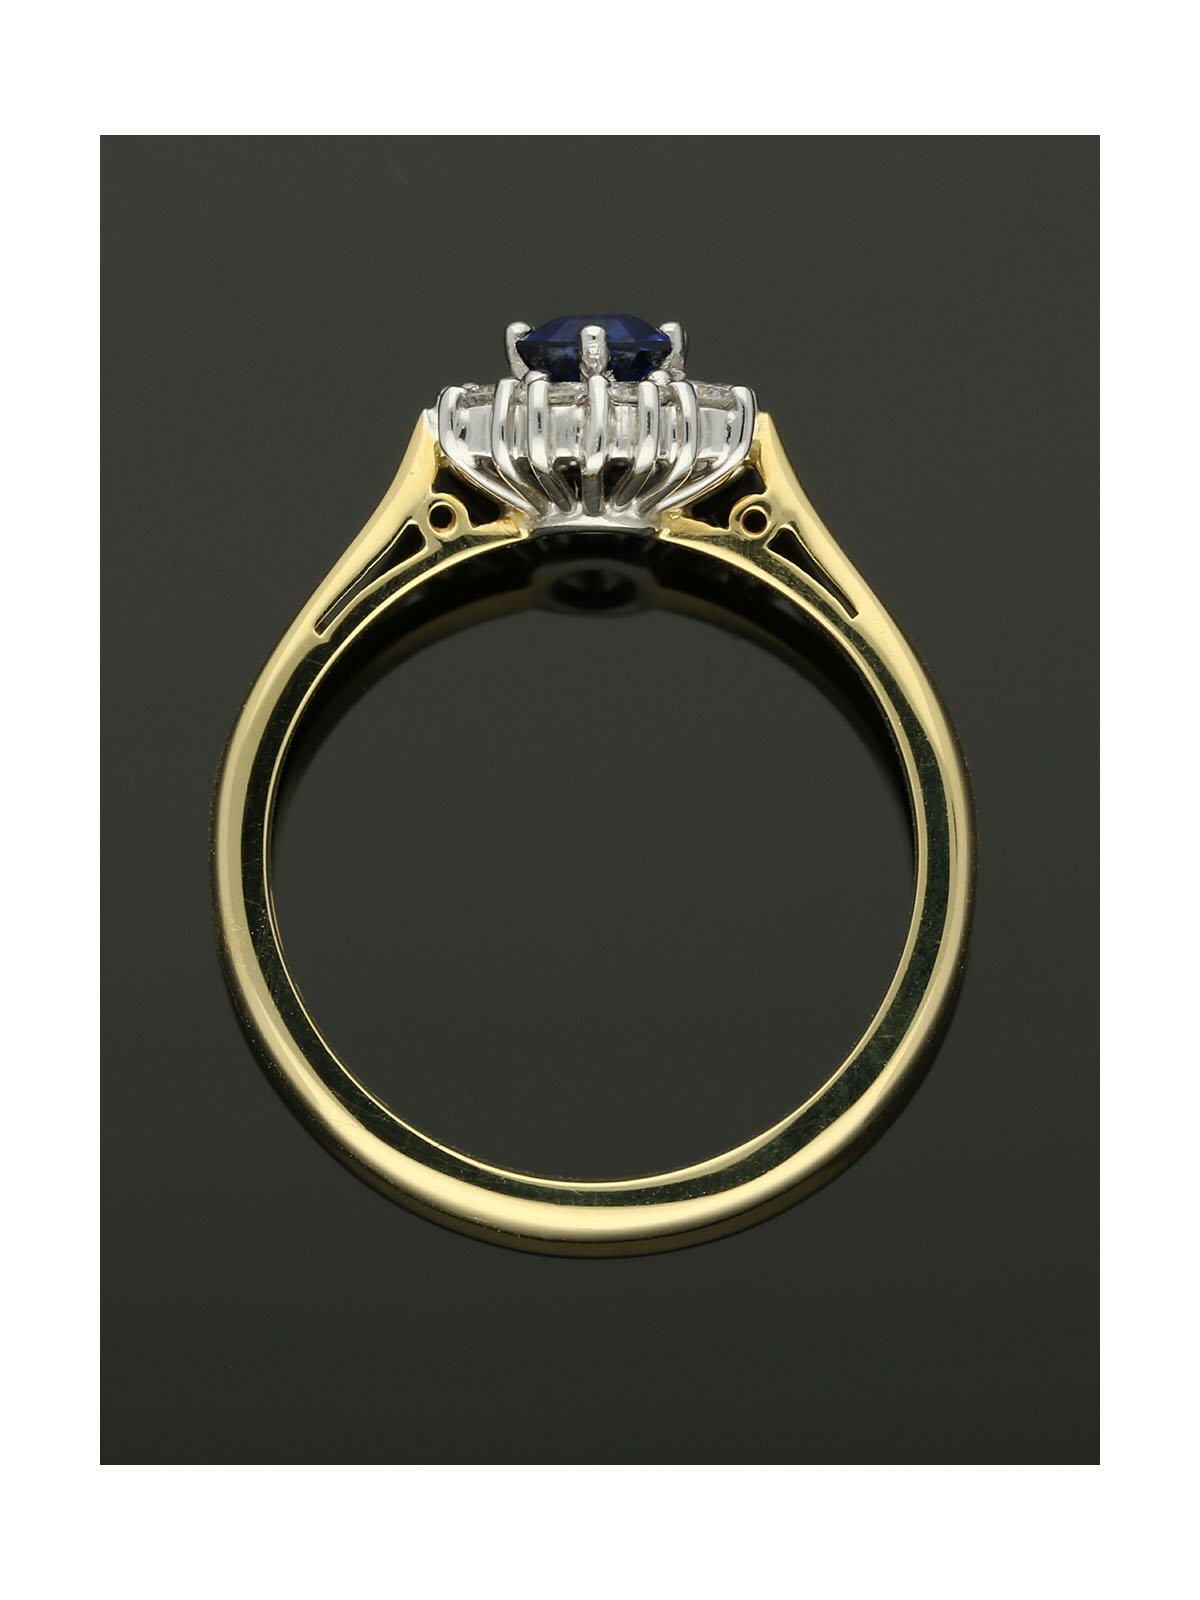 Sapphire & Diamond Cluster Ring in 18ct Yellow & White Gold